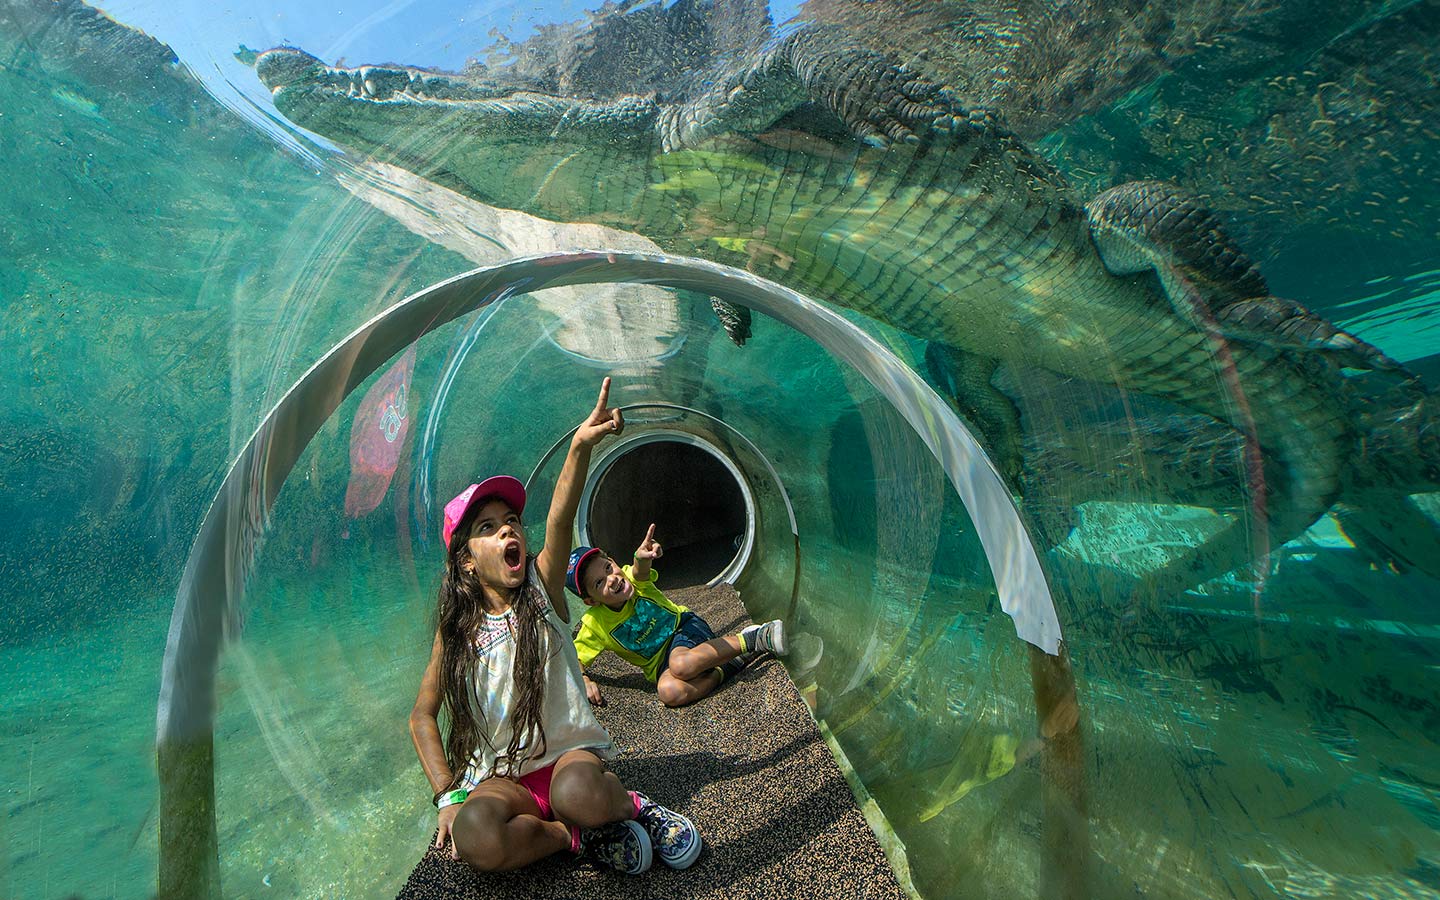 Crawl through the tube in the Everglades exhibit for an underwater point of view